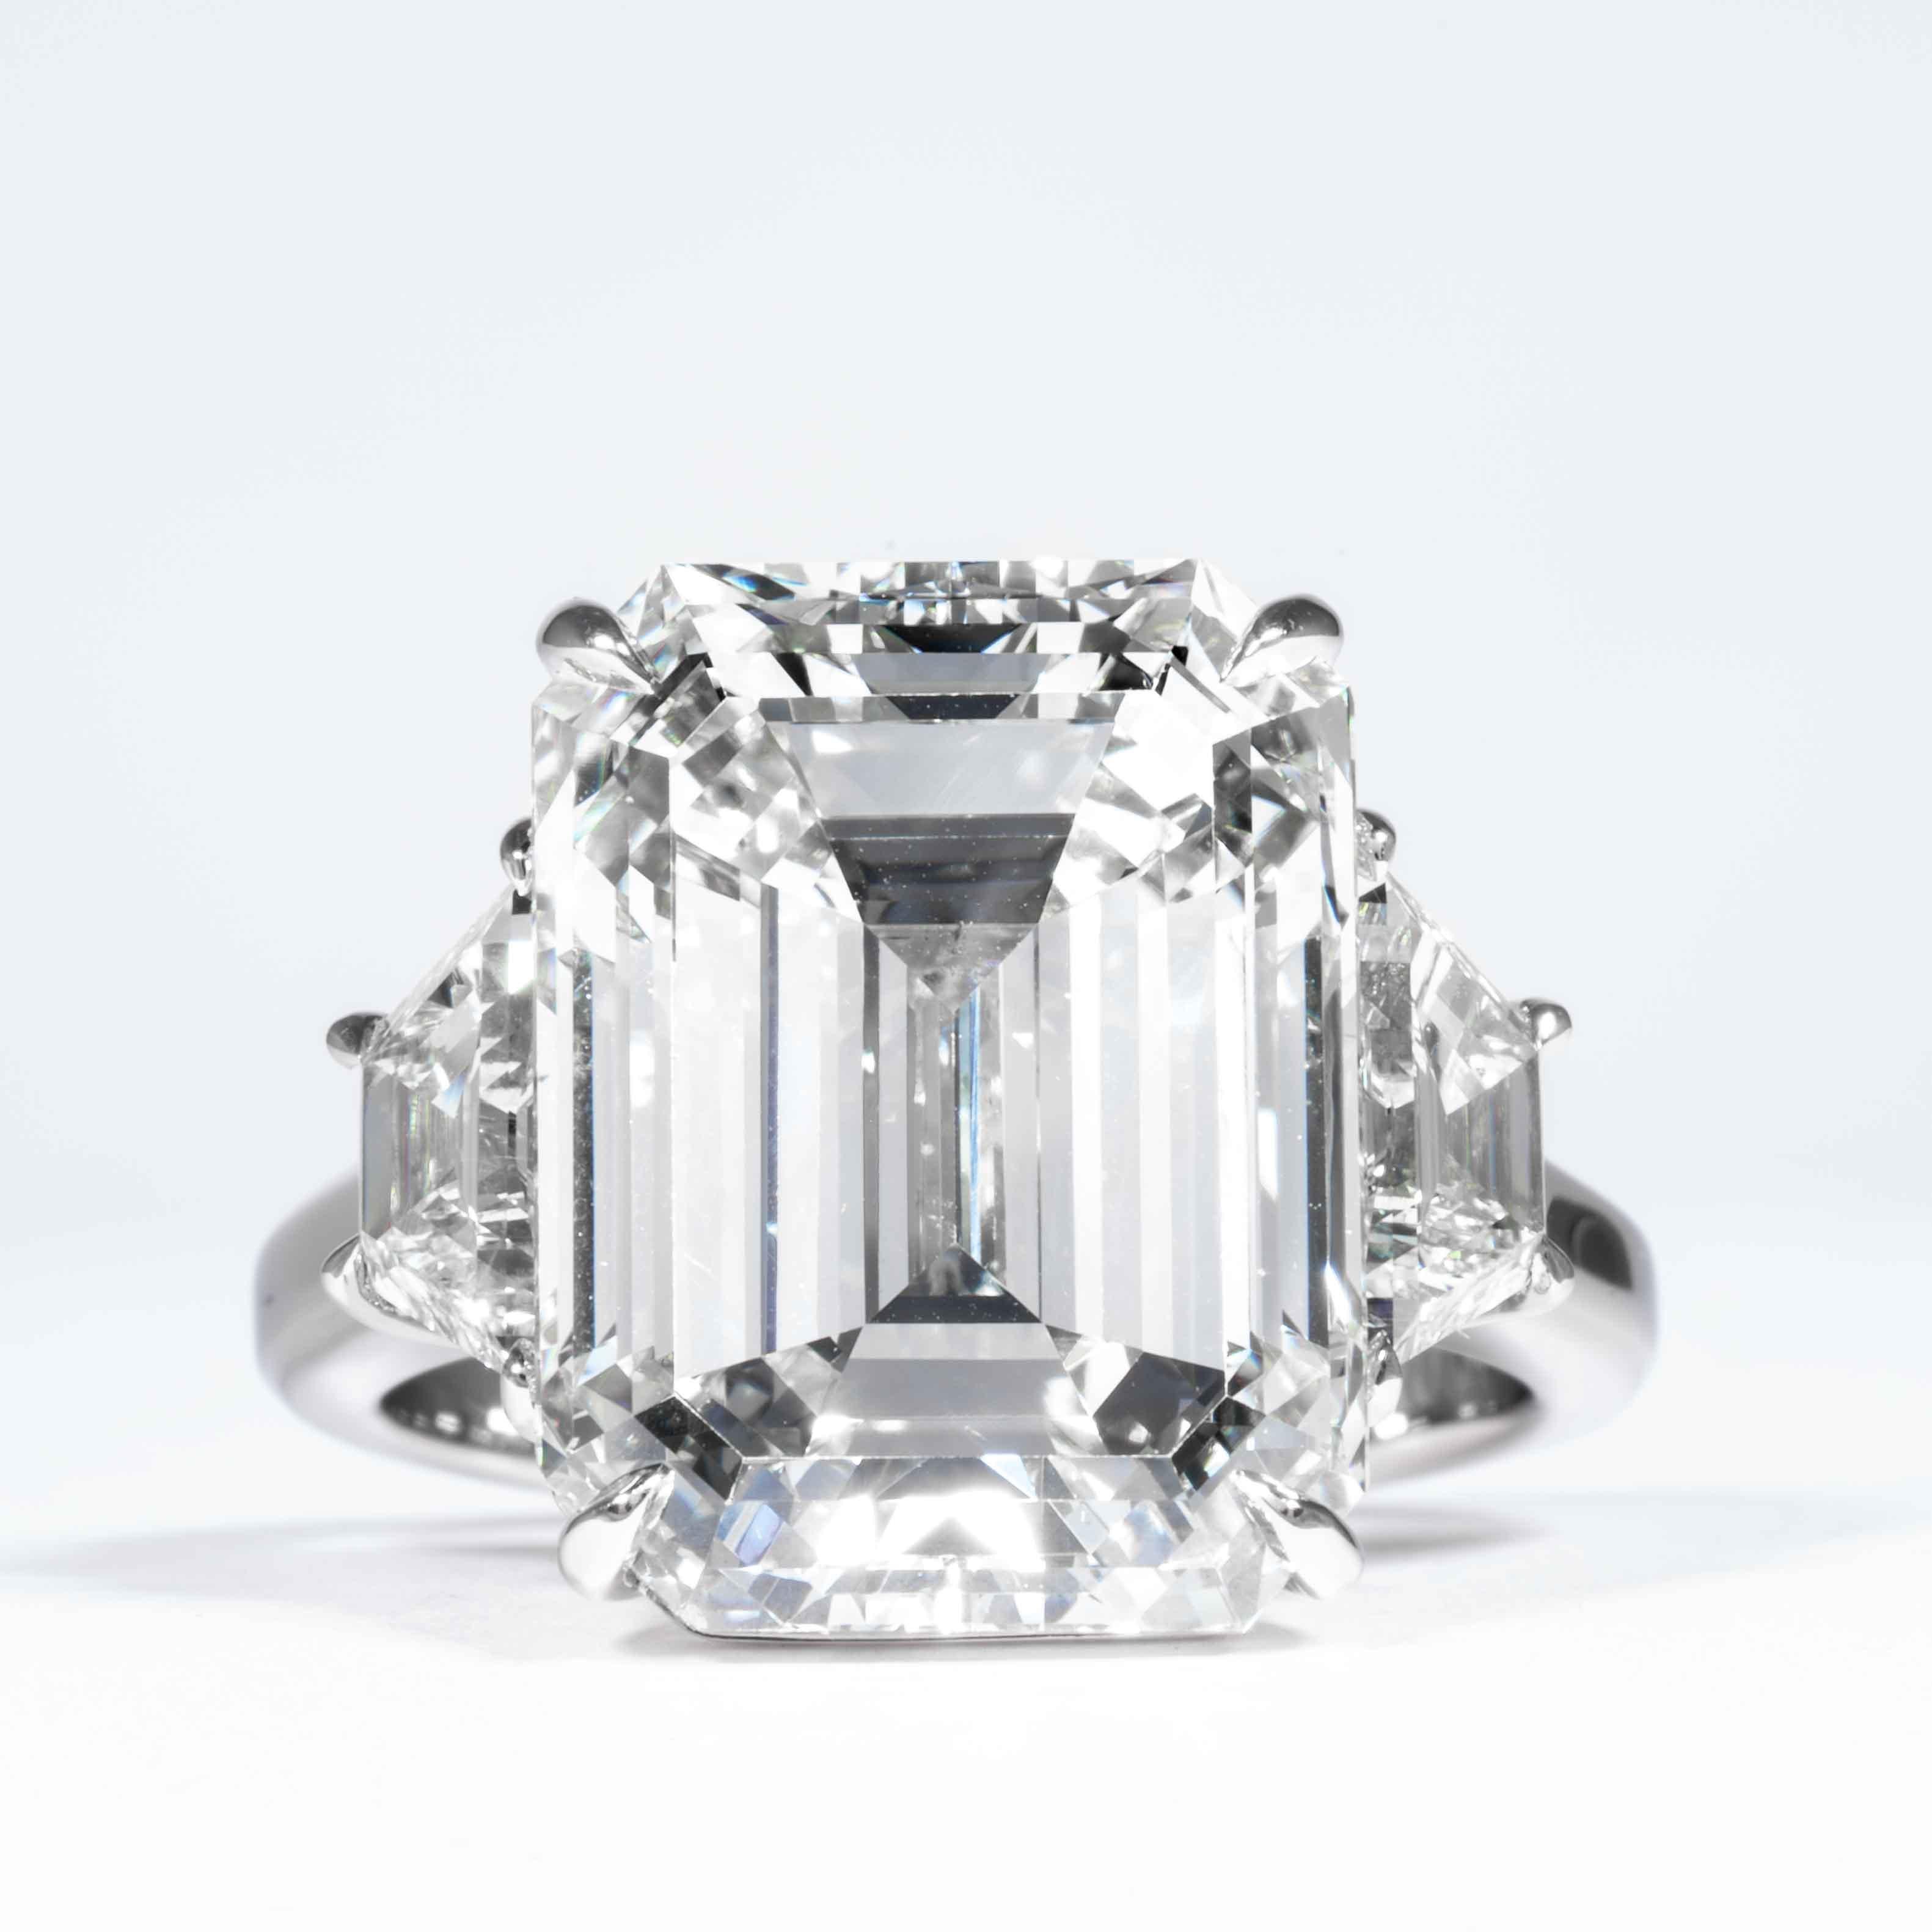 This 3-Stone diamond ring is offered by Shreve, Crump & Low. This 13.26 carat GIA Certified K VS2 emerald cut diamond measuring 15.30 x 11.64 x 8.31 mm is custom set in a handcrafted Shreve, Crump & Low platinum 3-stone ring. The 13.26 carat emerald